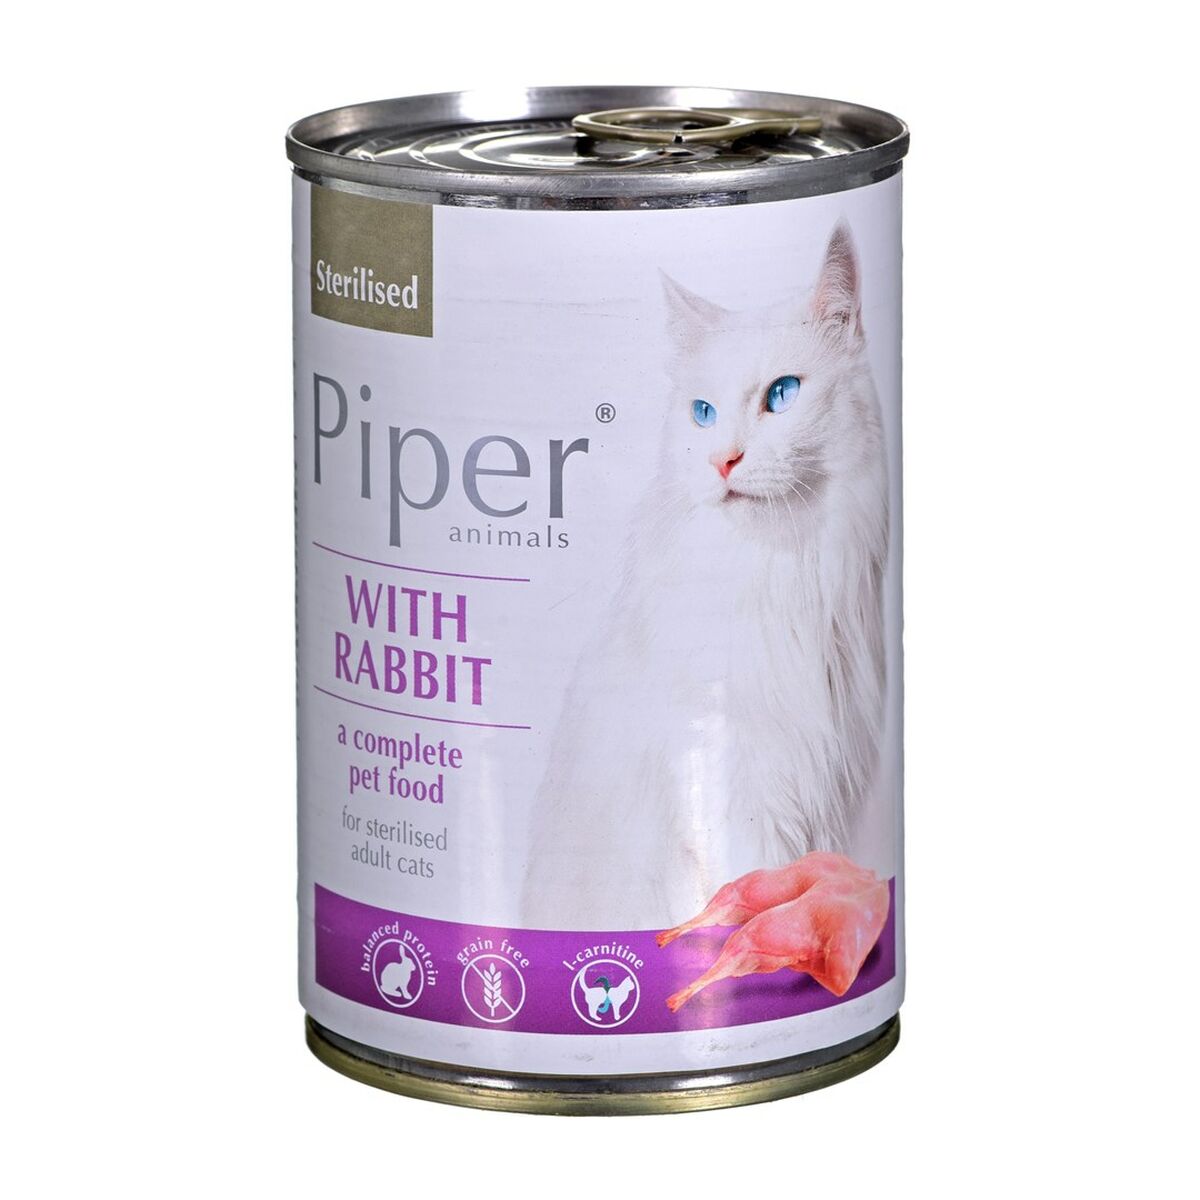 Aliments pour chat Dolina Noteci Piper Animals Sterilised